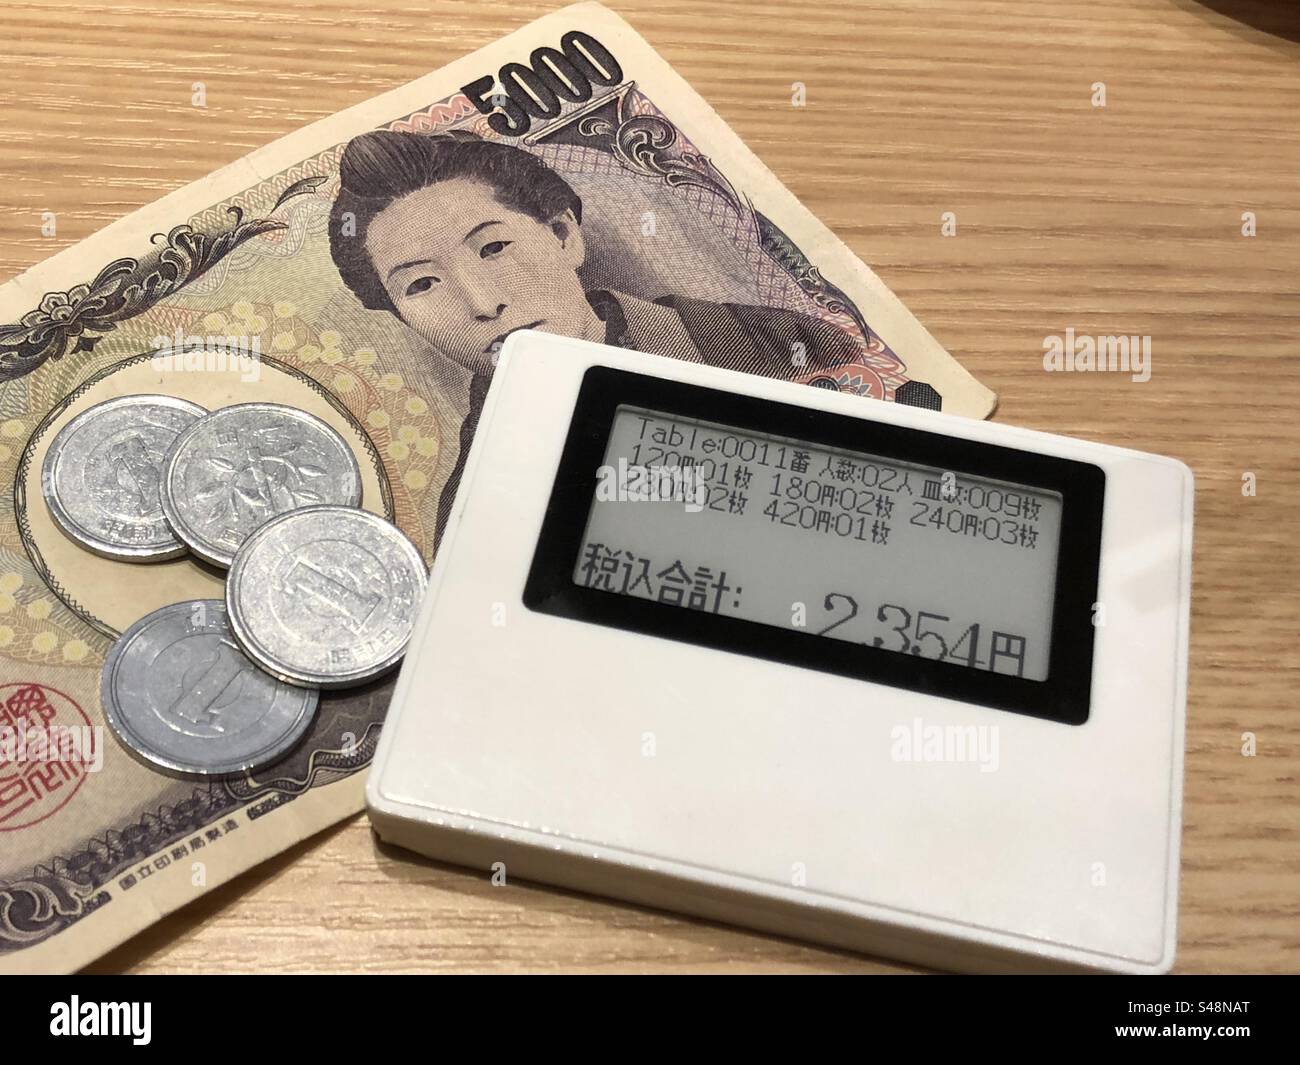 Food pager and Yen in Japan Stock Photo